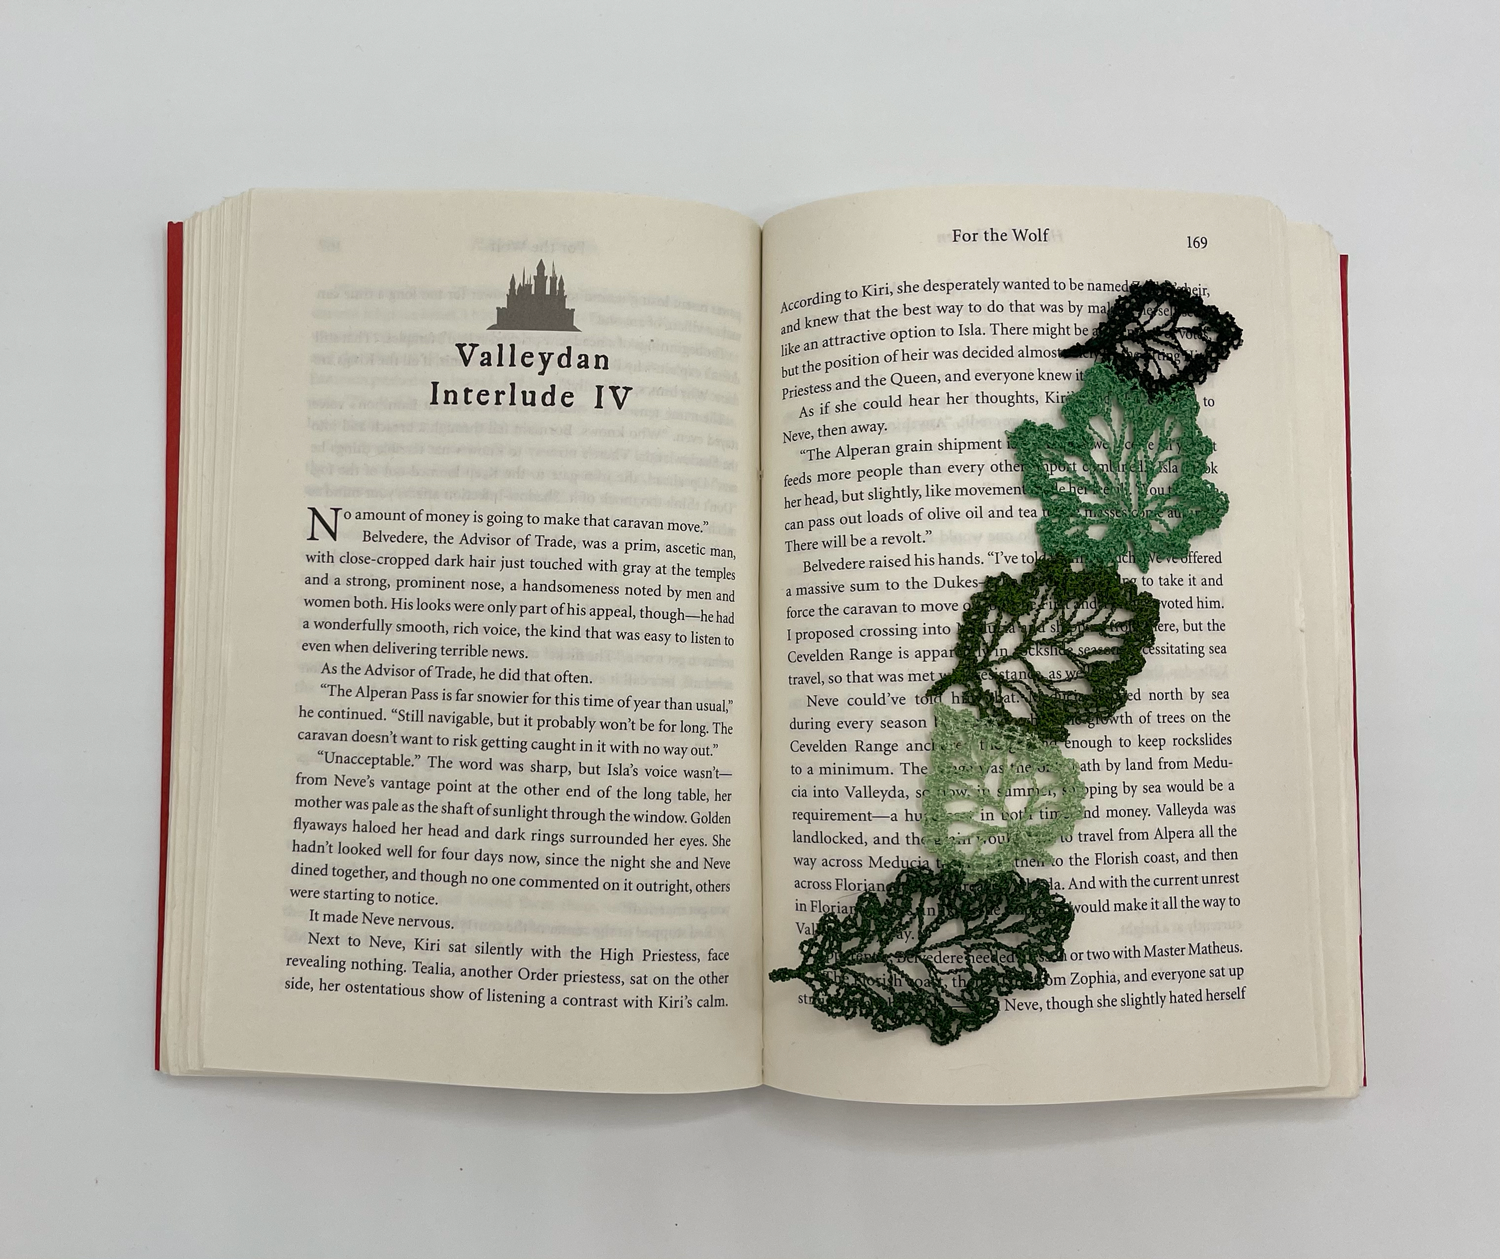 Lovely Green Lace Embroidered Leaf Bookmark